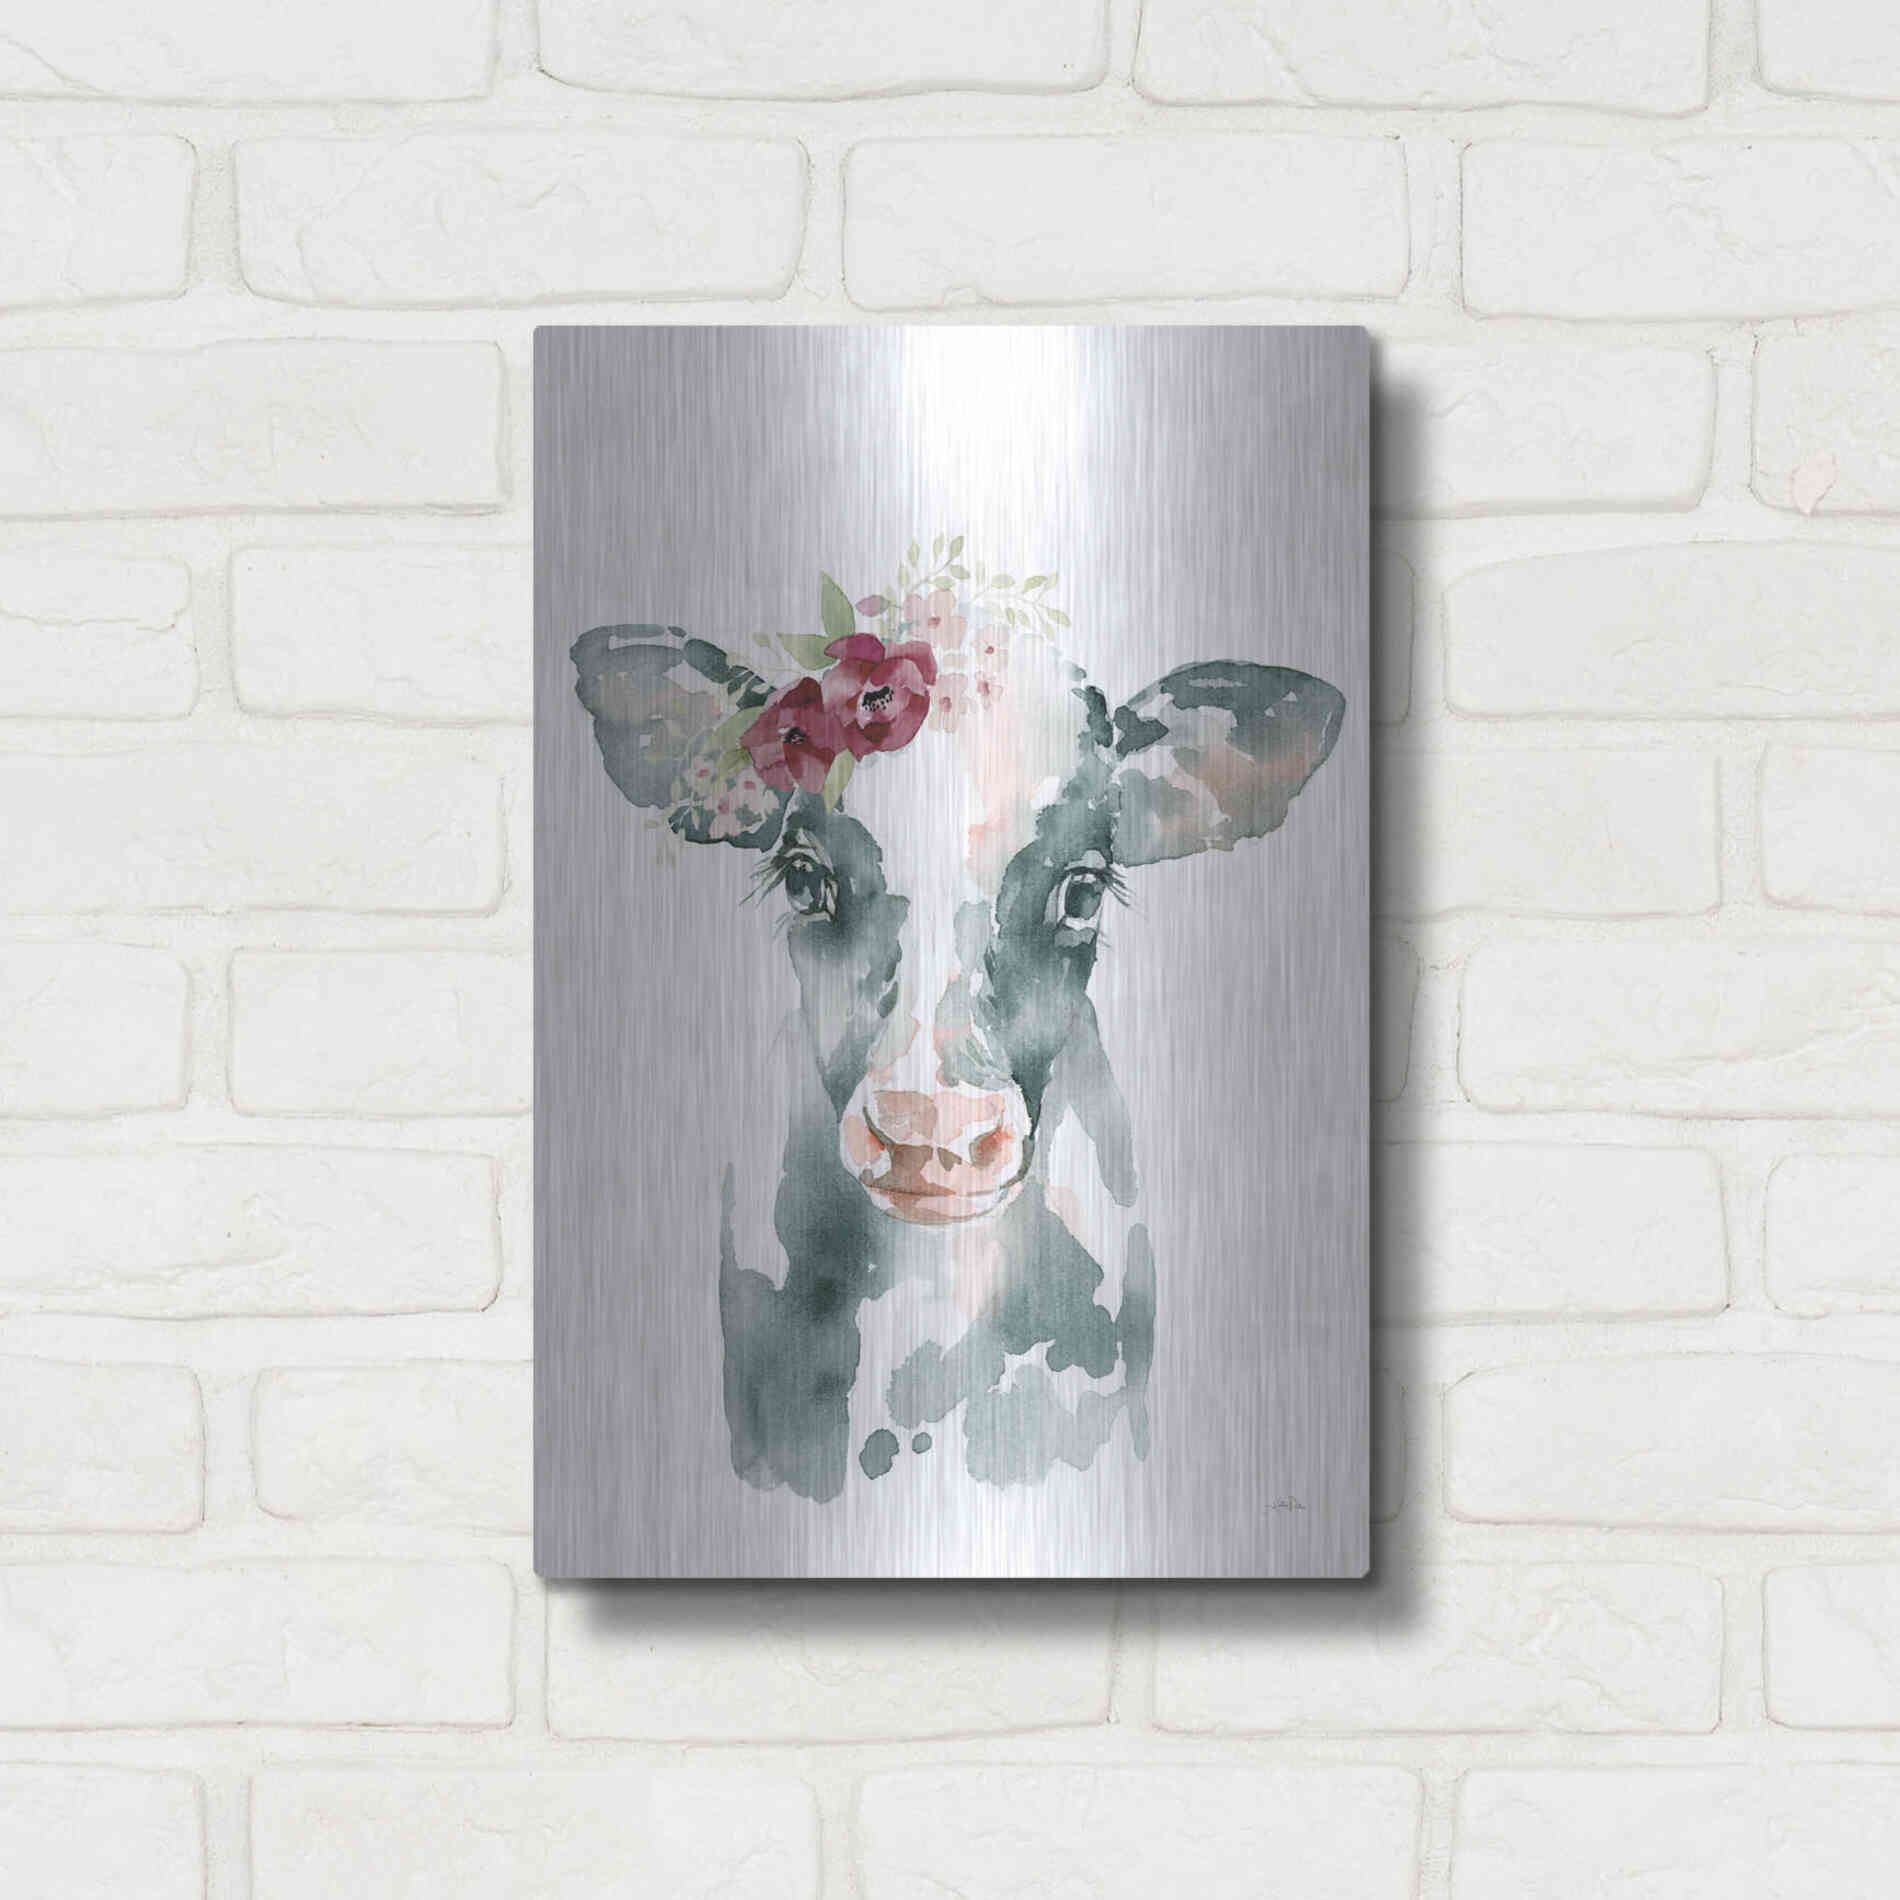 Luxe Metal Art 'Floral Cow' by Katrina Pete, Metal Wall Art,12x16